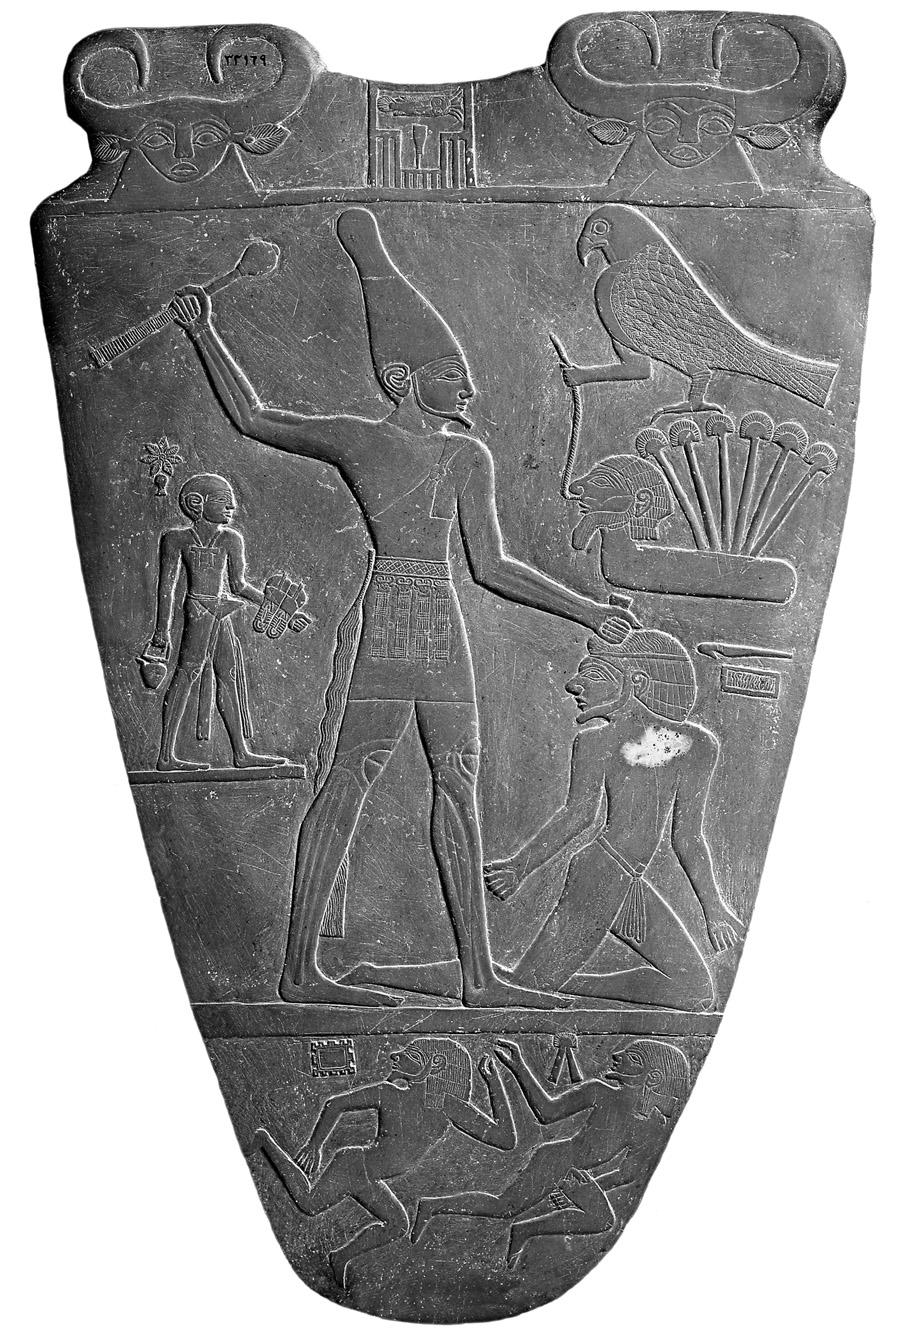 ITTC05 1/25/07 2:57 PM Page 107 The Rise of Complex Society and Early Civilization 107 Figure 5.5 Narmer Palette, reverse.